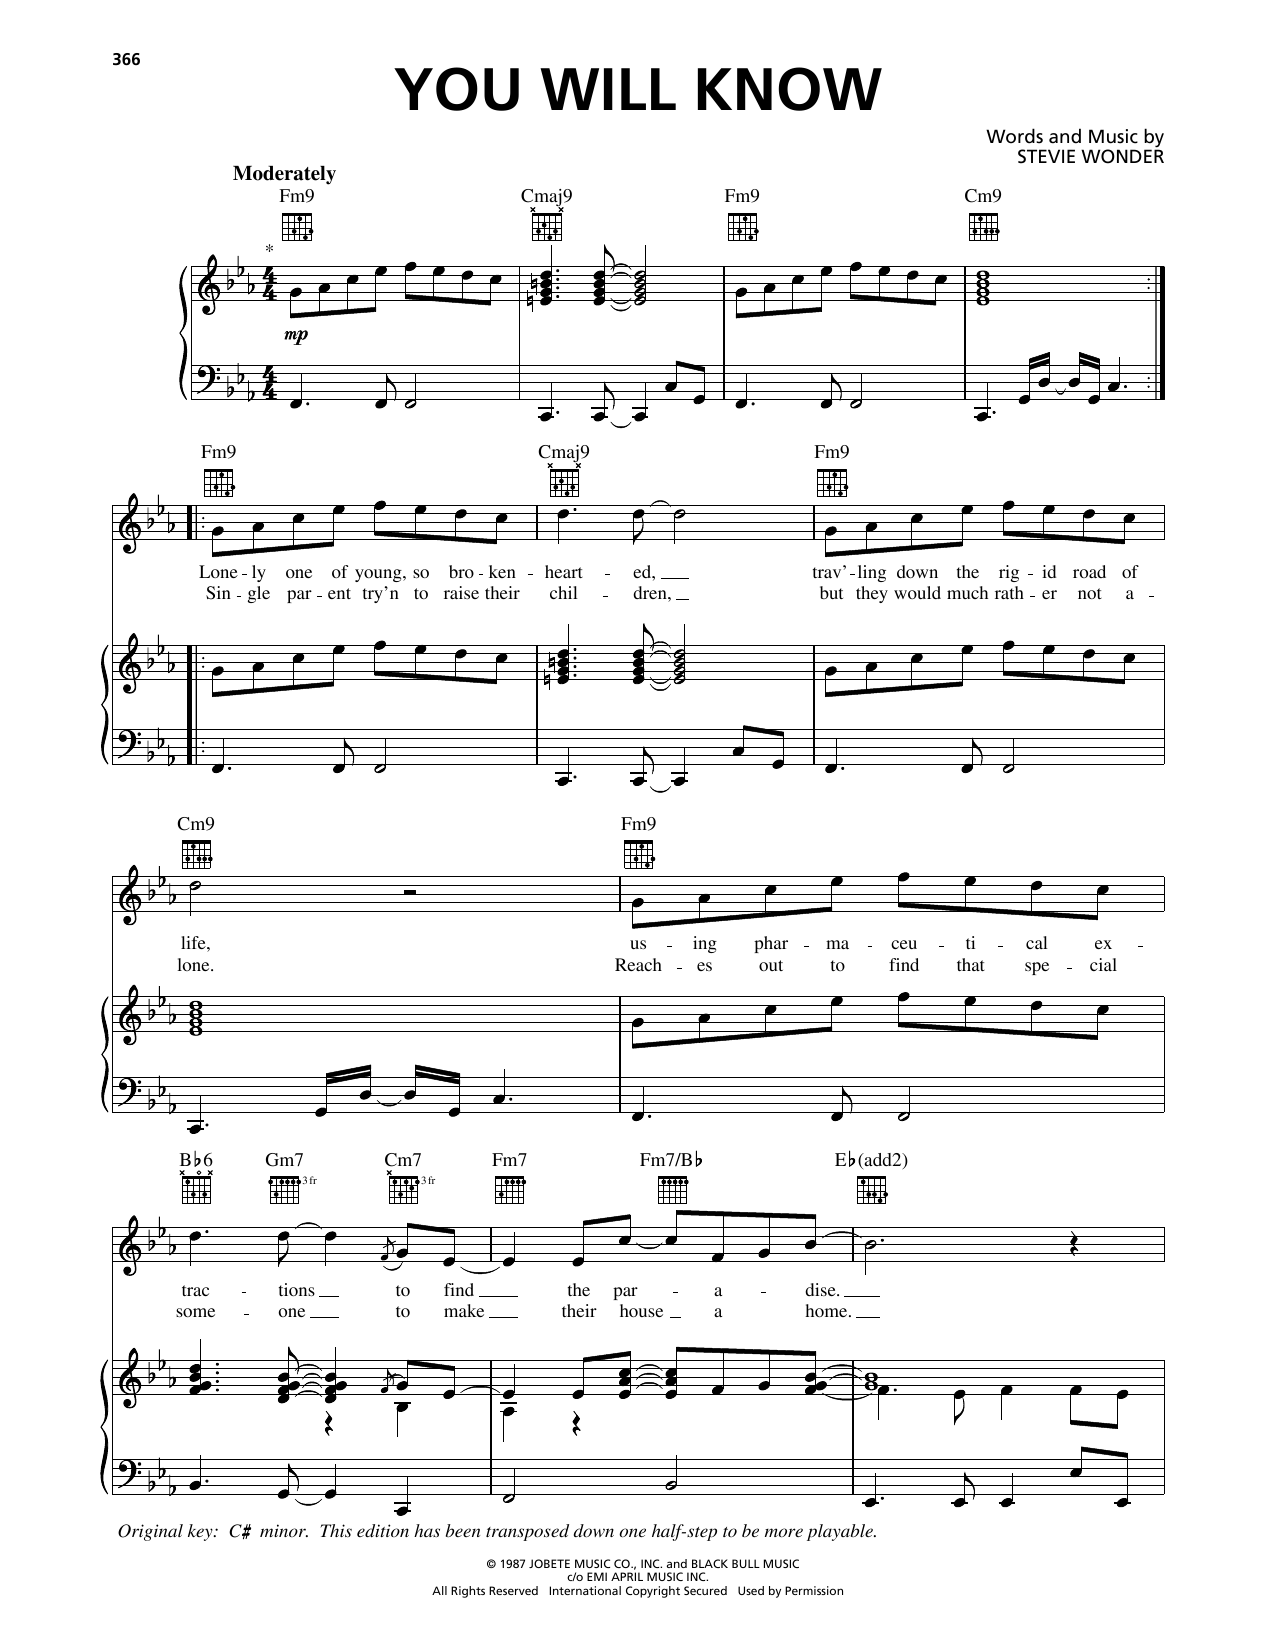 Download Stevie Wonder You Will Know Sheet Music